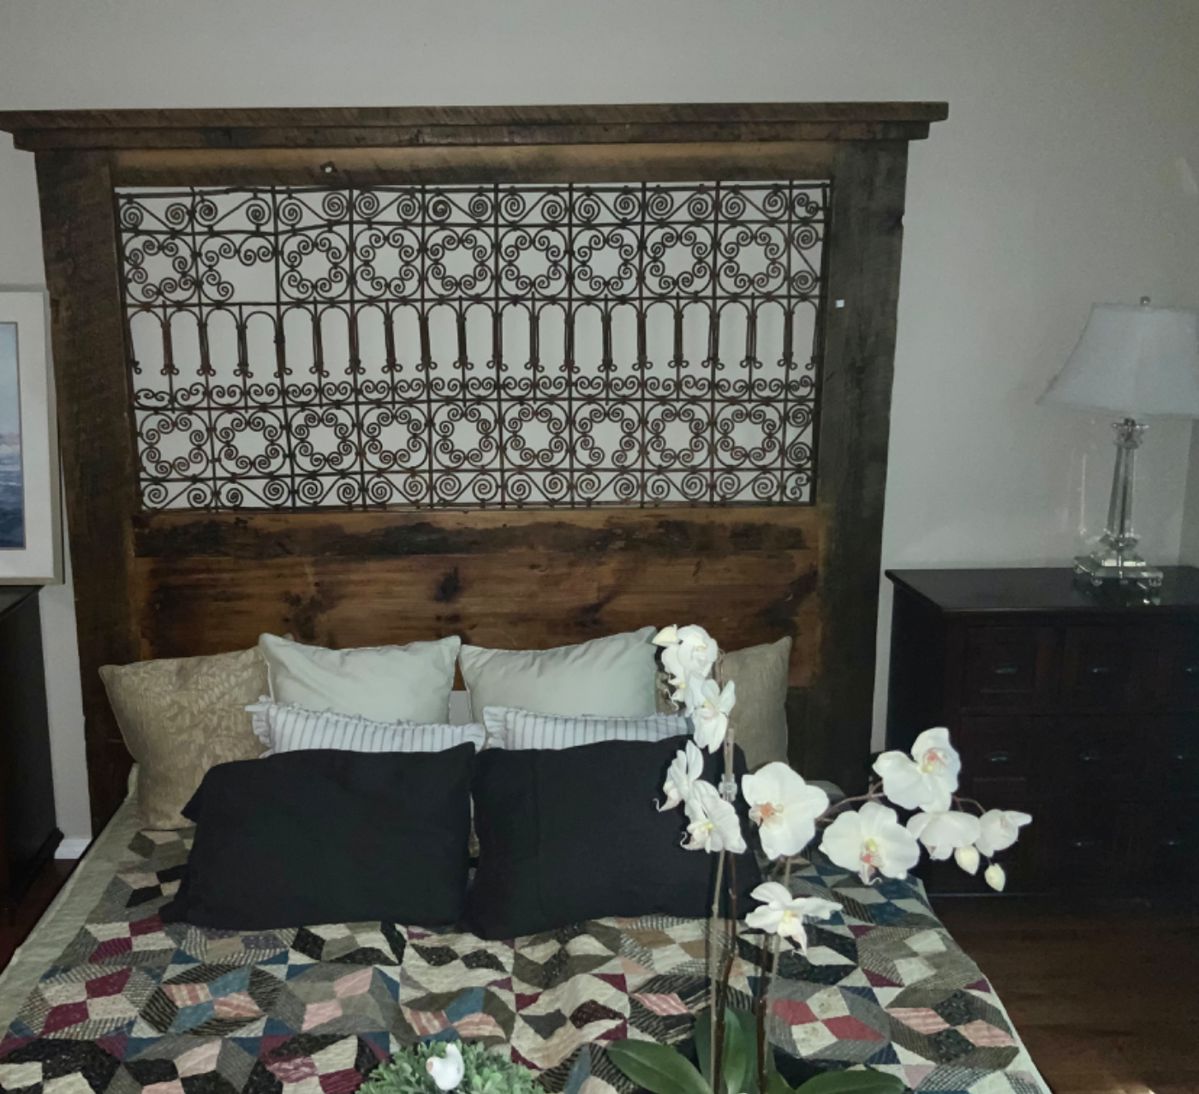 King size unique headboard made from antique window grill!